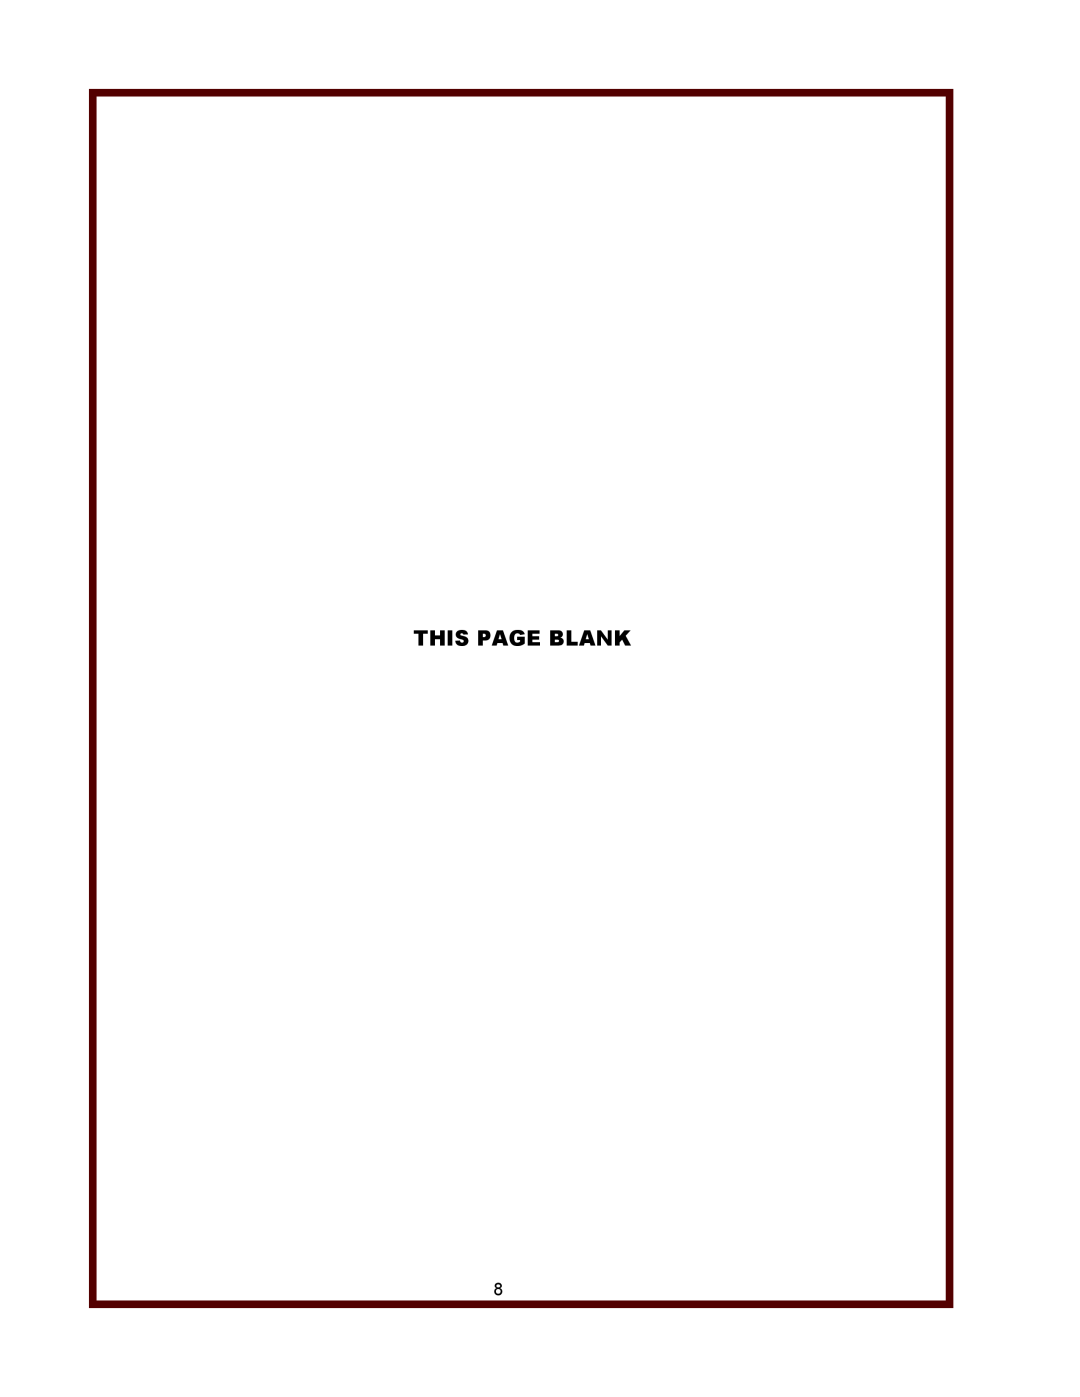 Wells BT-4C, T-4C, T-4C 15A operation manual This Page Blank 